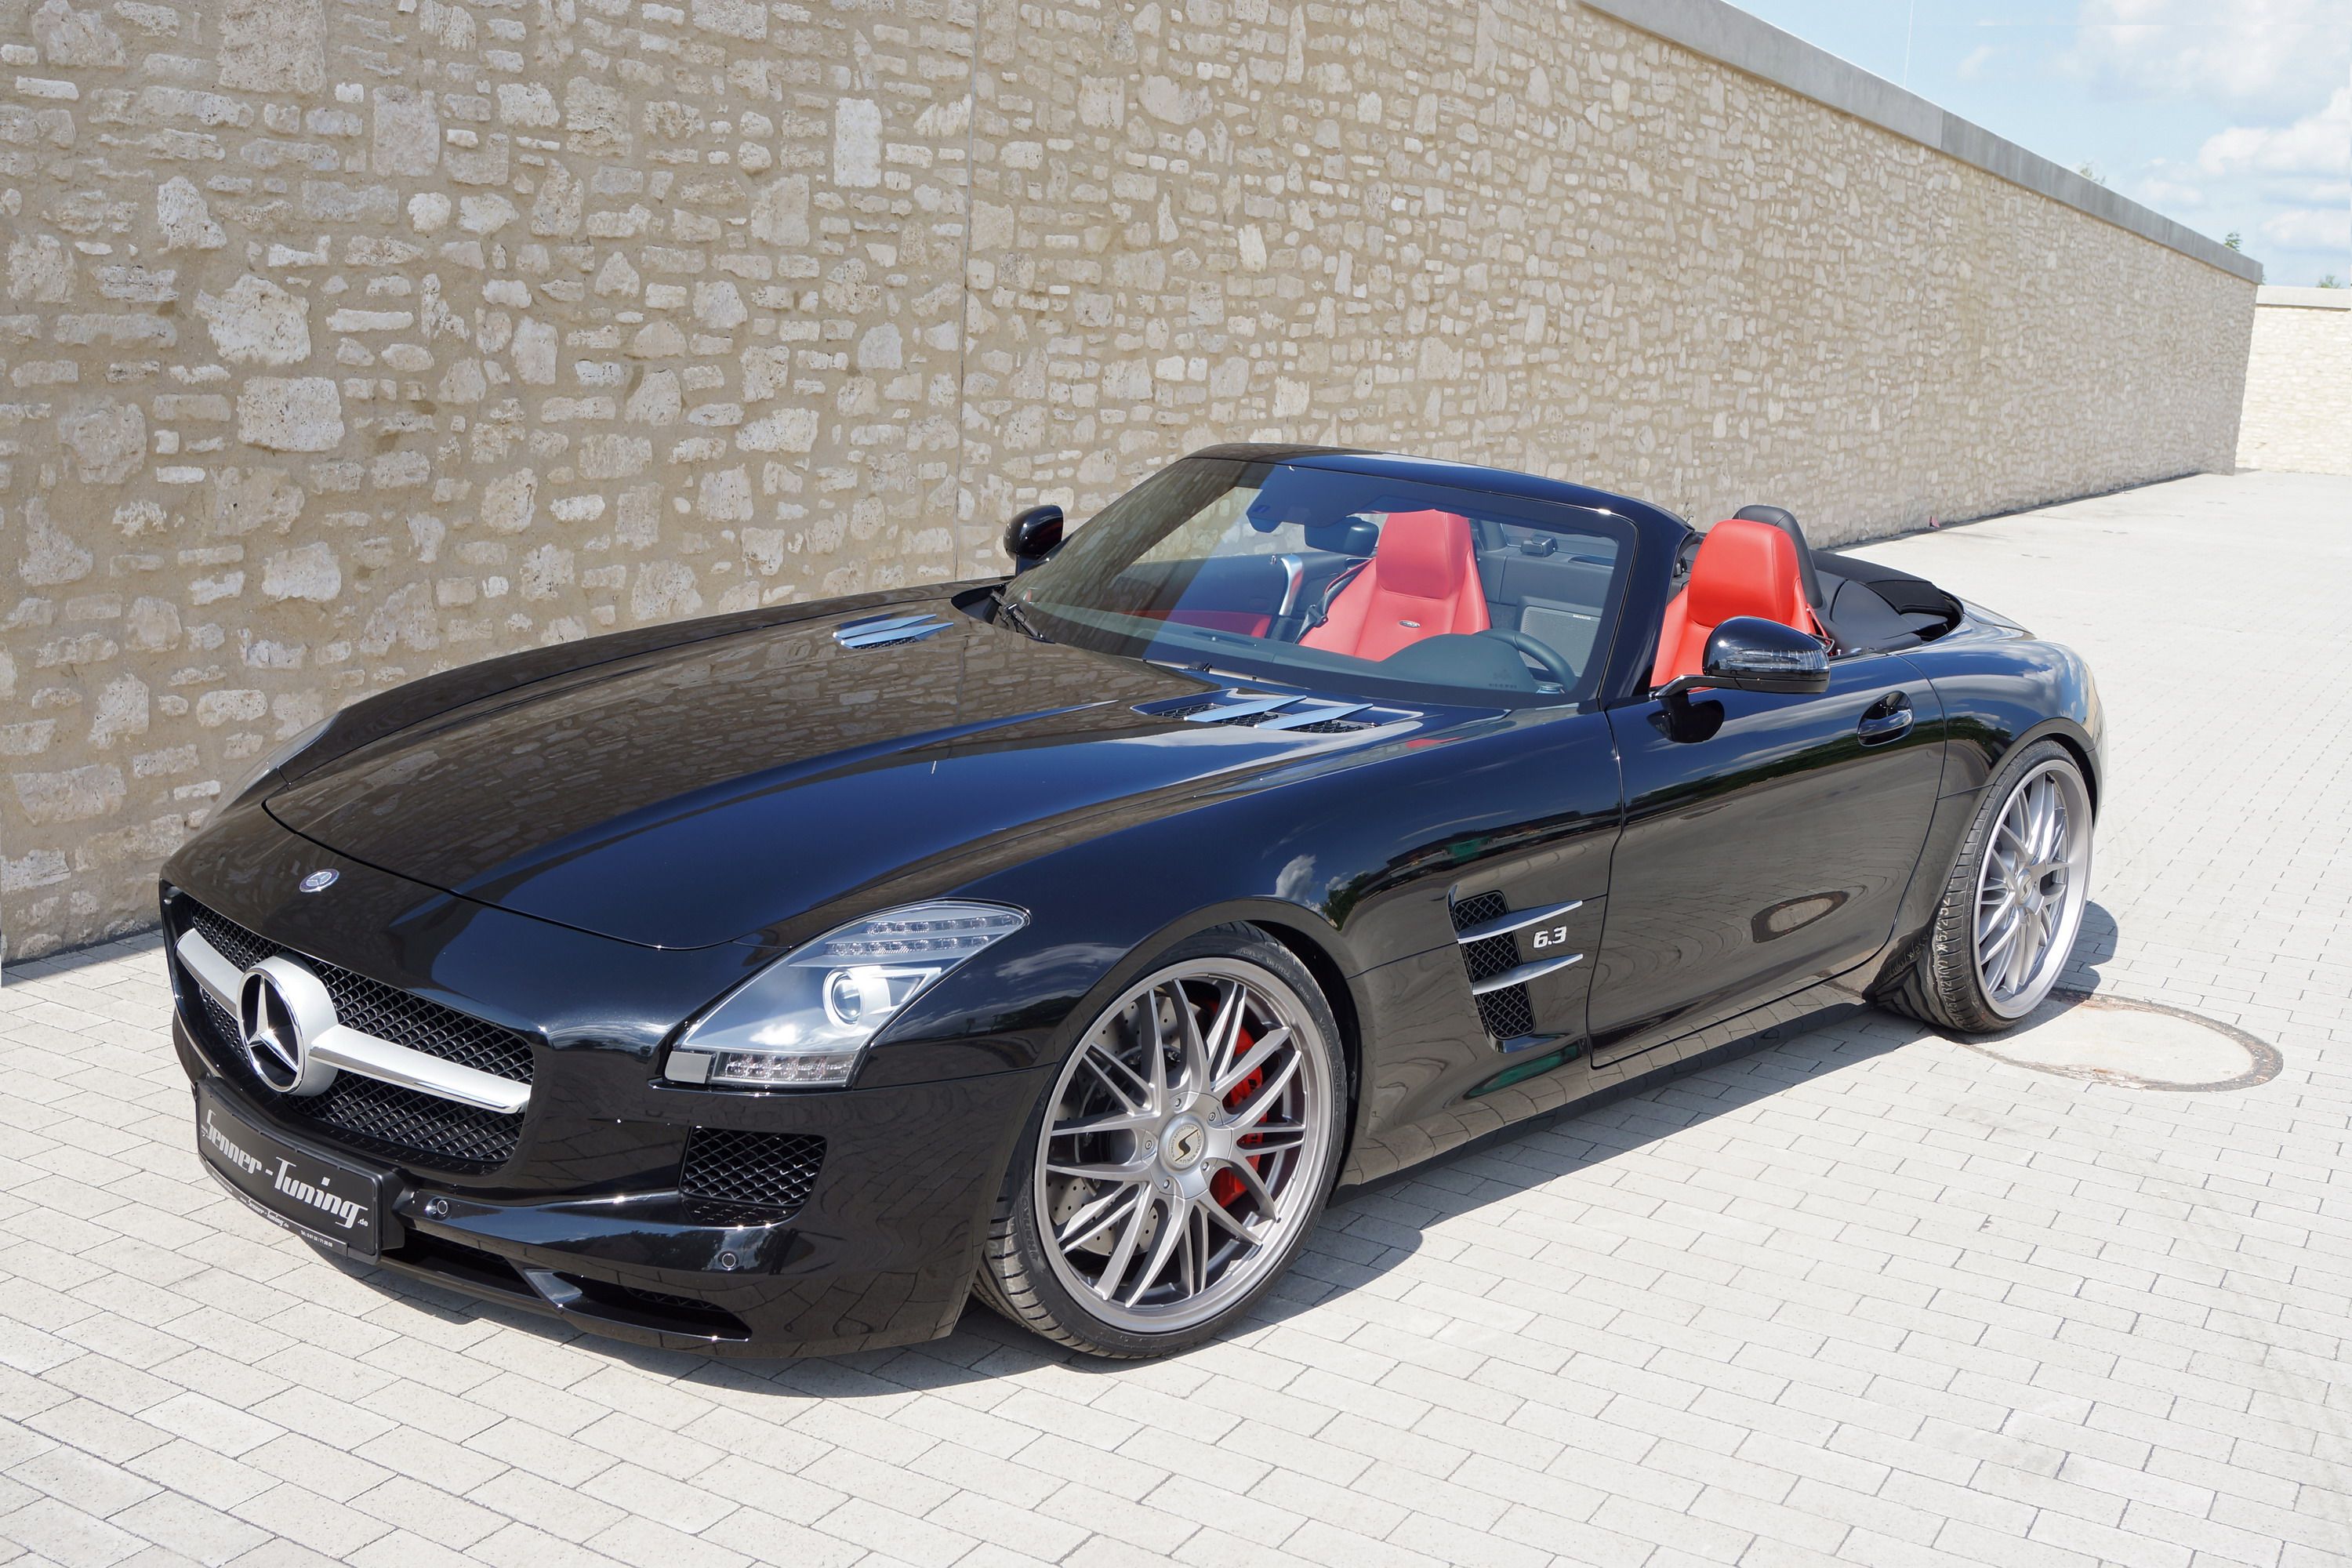 2013 Mercedes-Benz SLS63 AMG Roadster by Senner Tuning